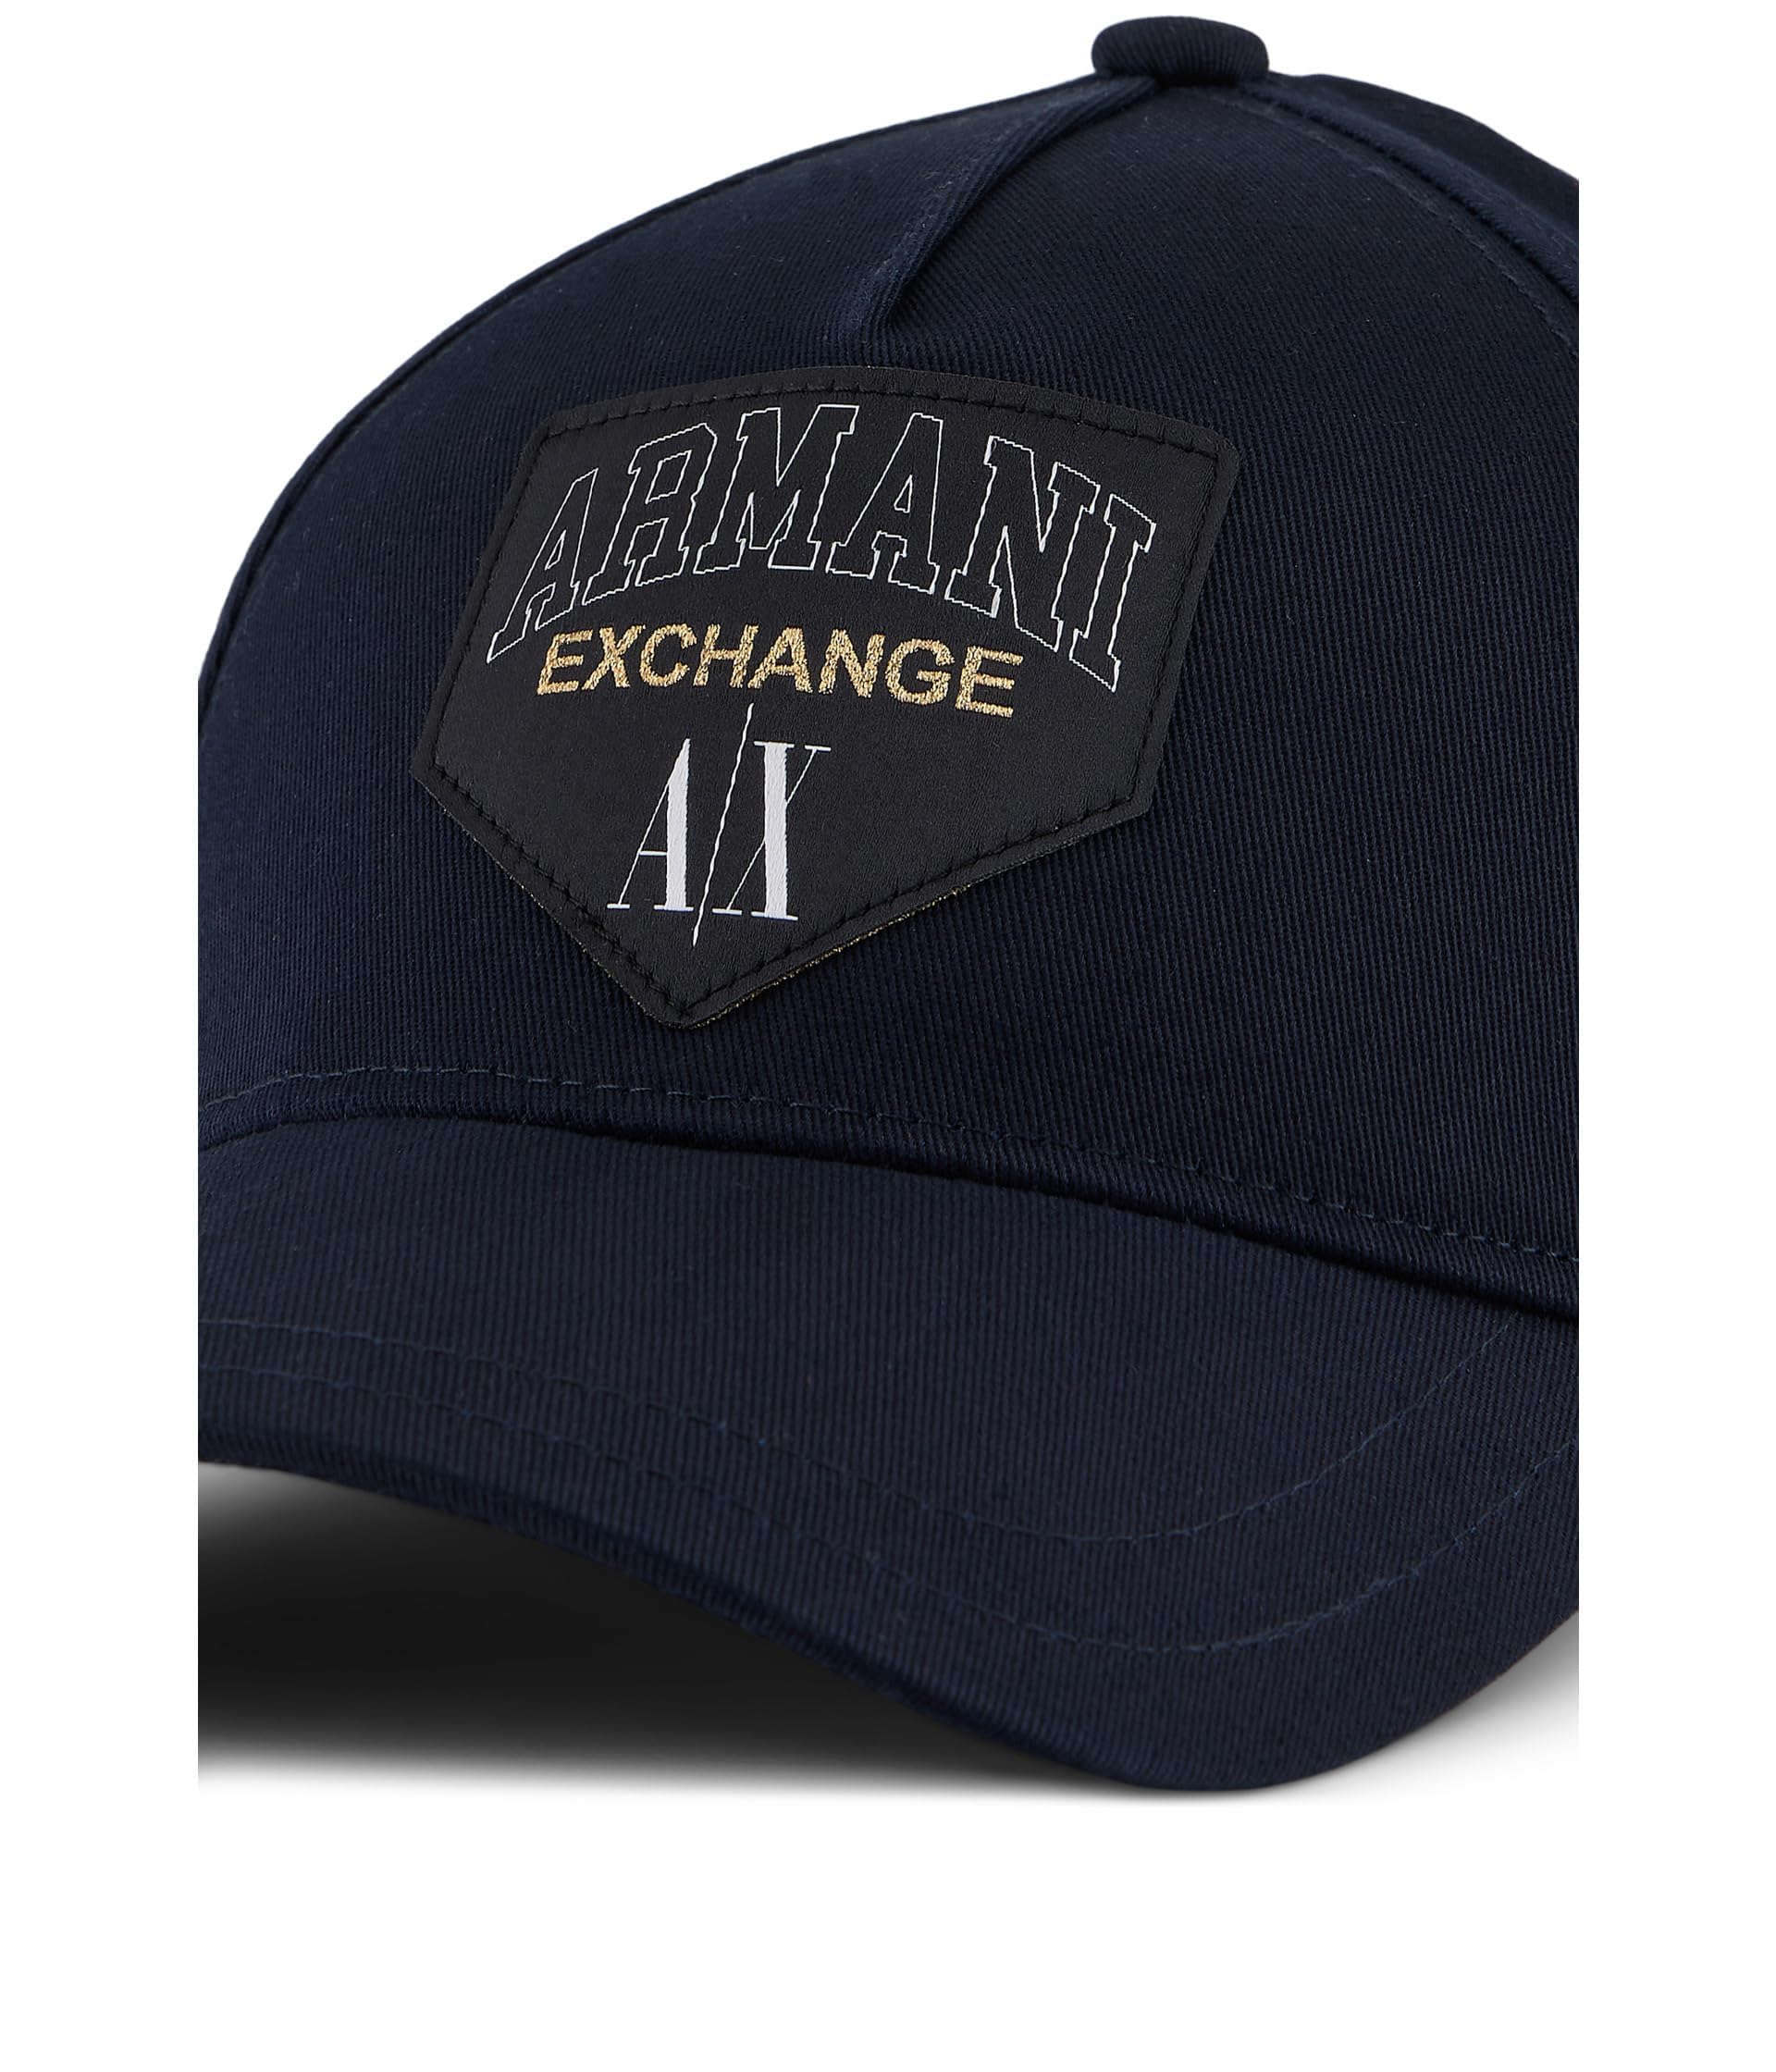 A | X ARMANI EXCHANGE Men's Collegiate Capsule Baseball Hat, Navy, One Size - Caps Fitted Caps Fitted Emporio Armani